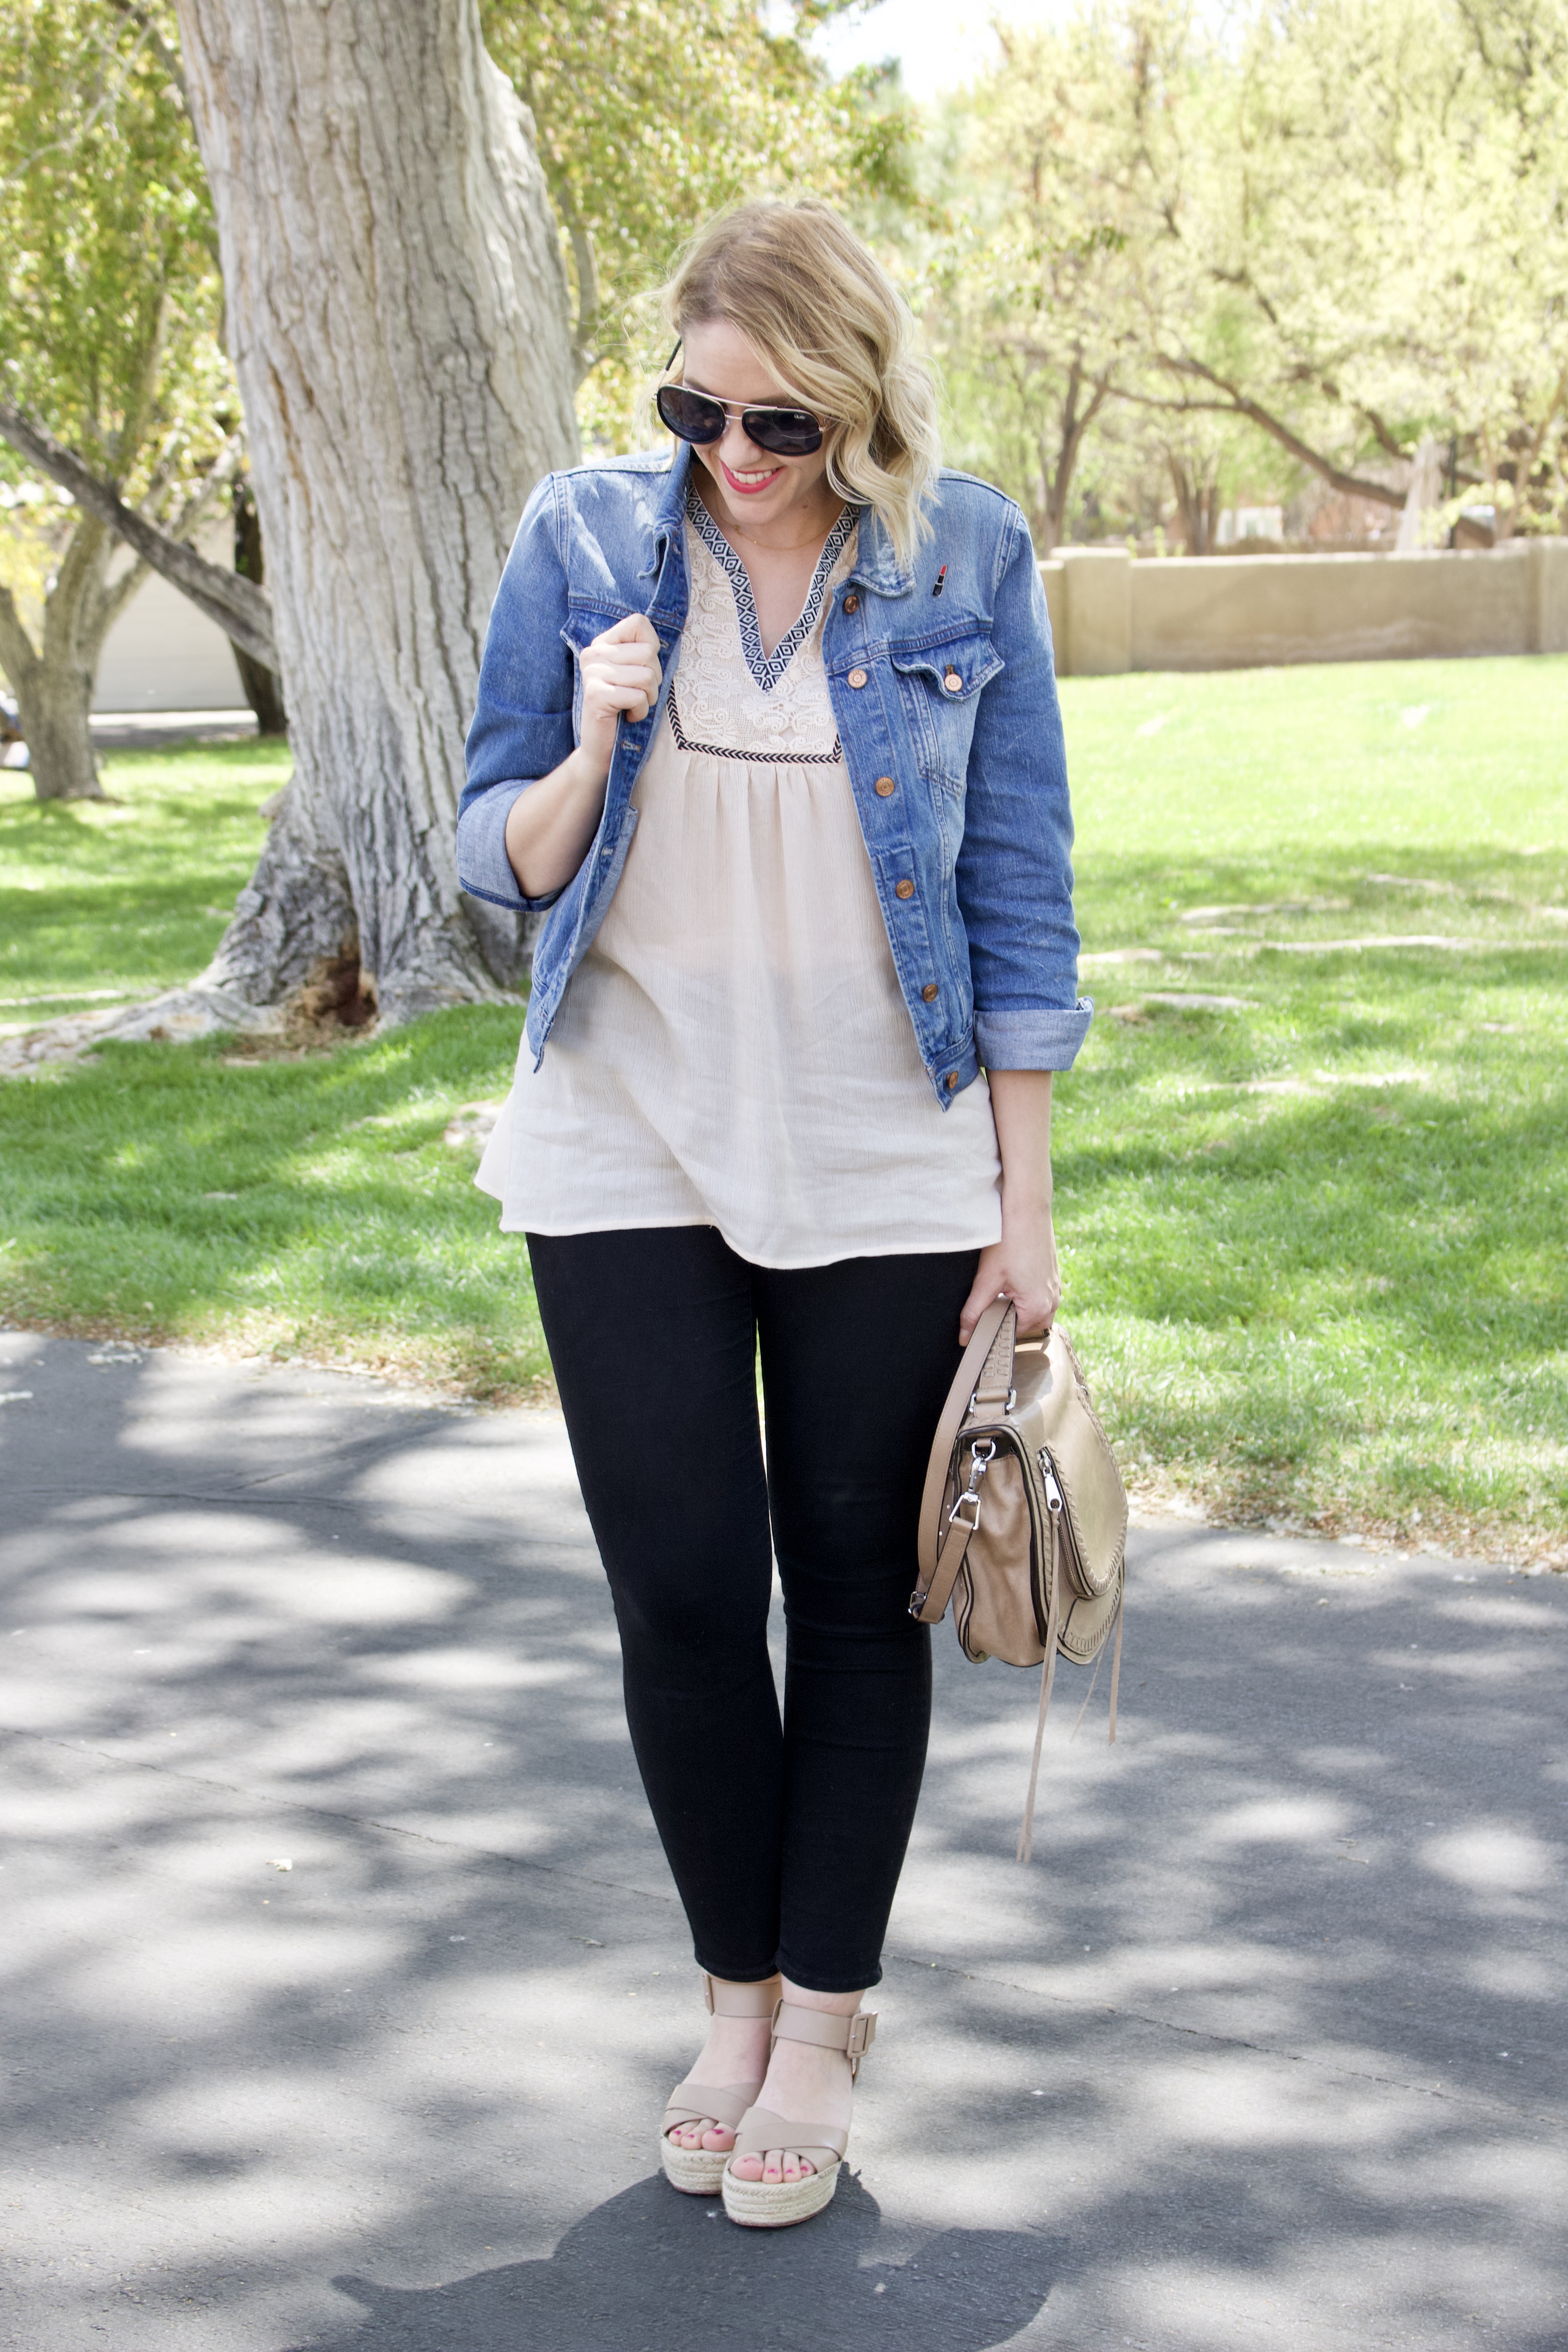 casual spring layers #jeanjacket #springlayers #springoutfit #momstyle